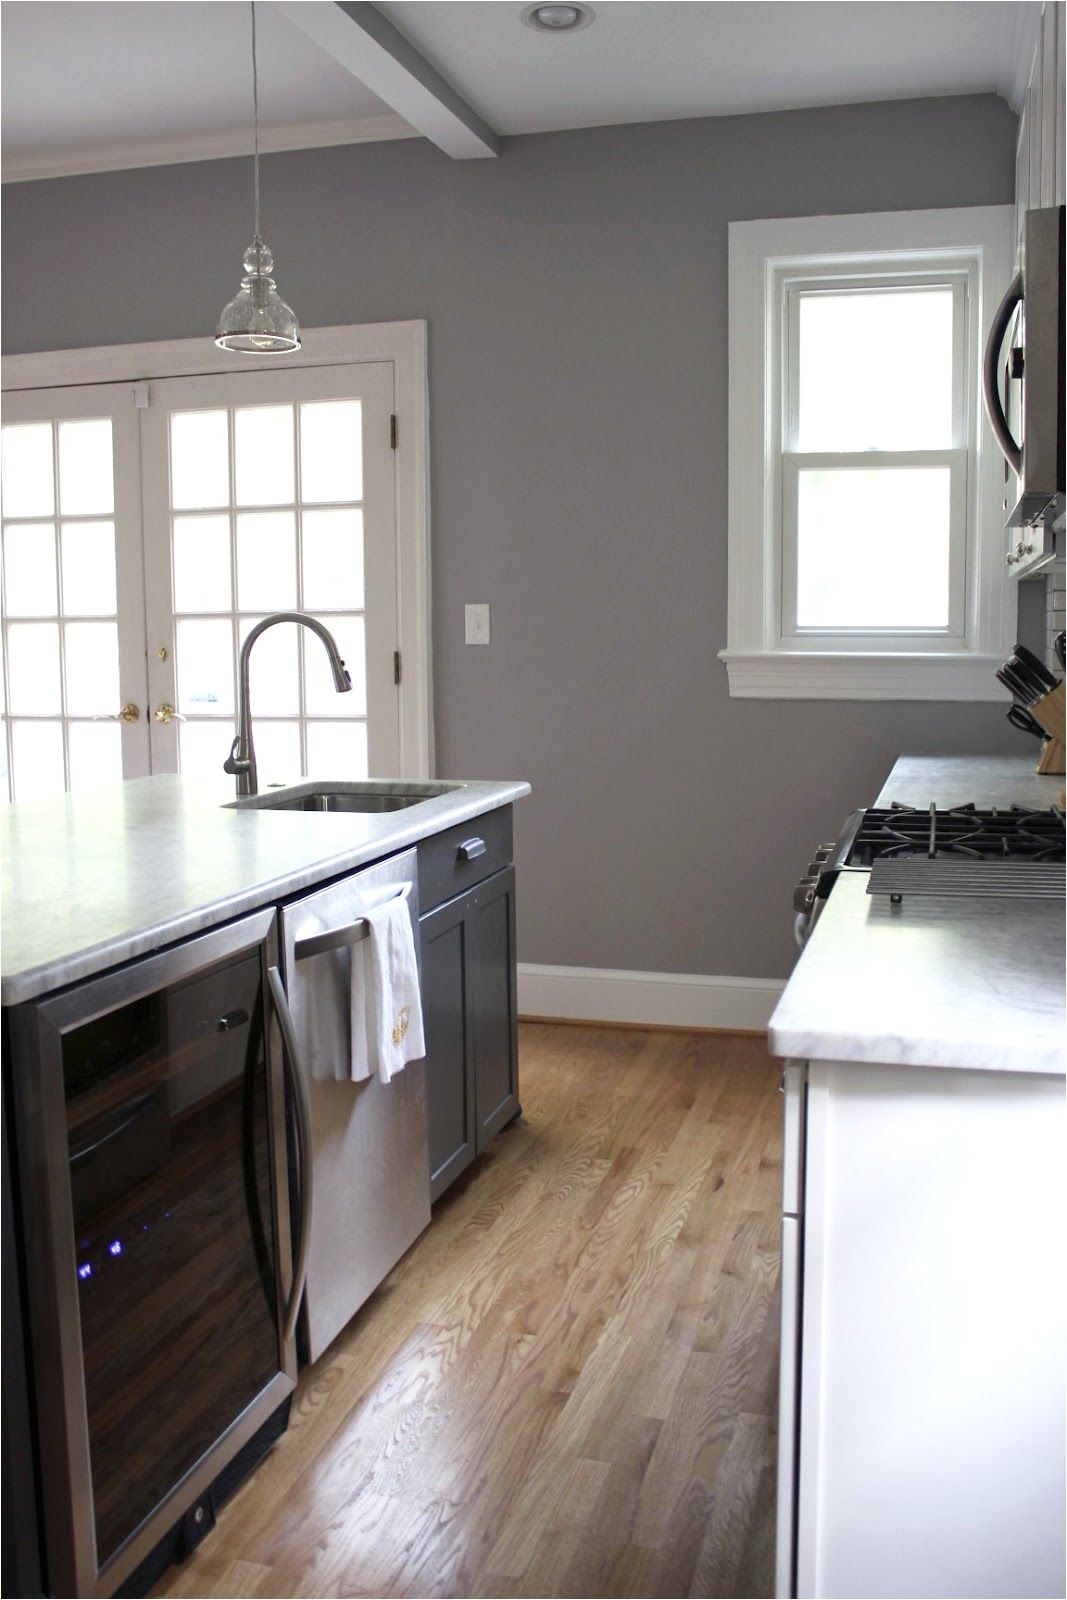 behr porpoise i love the gray walls with the wood floors i have this in my home